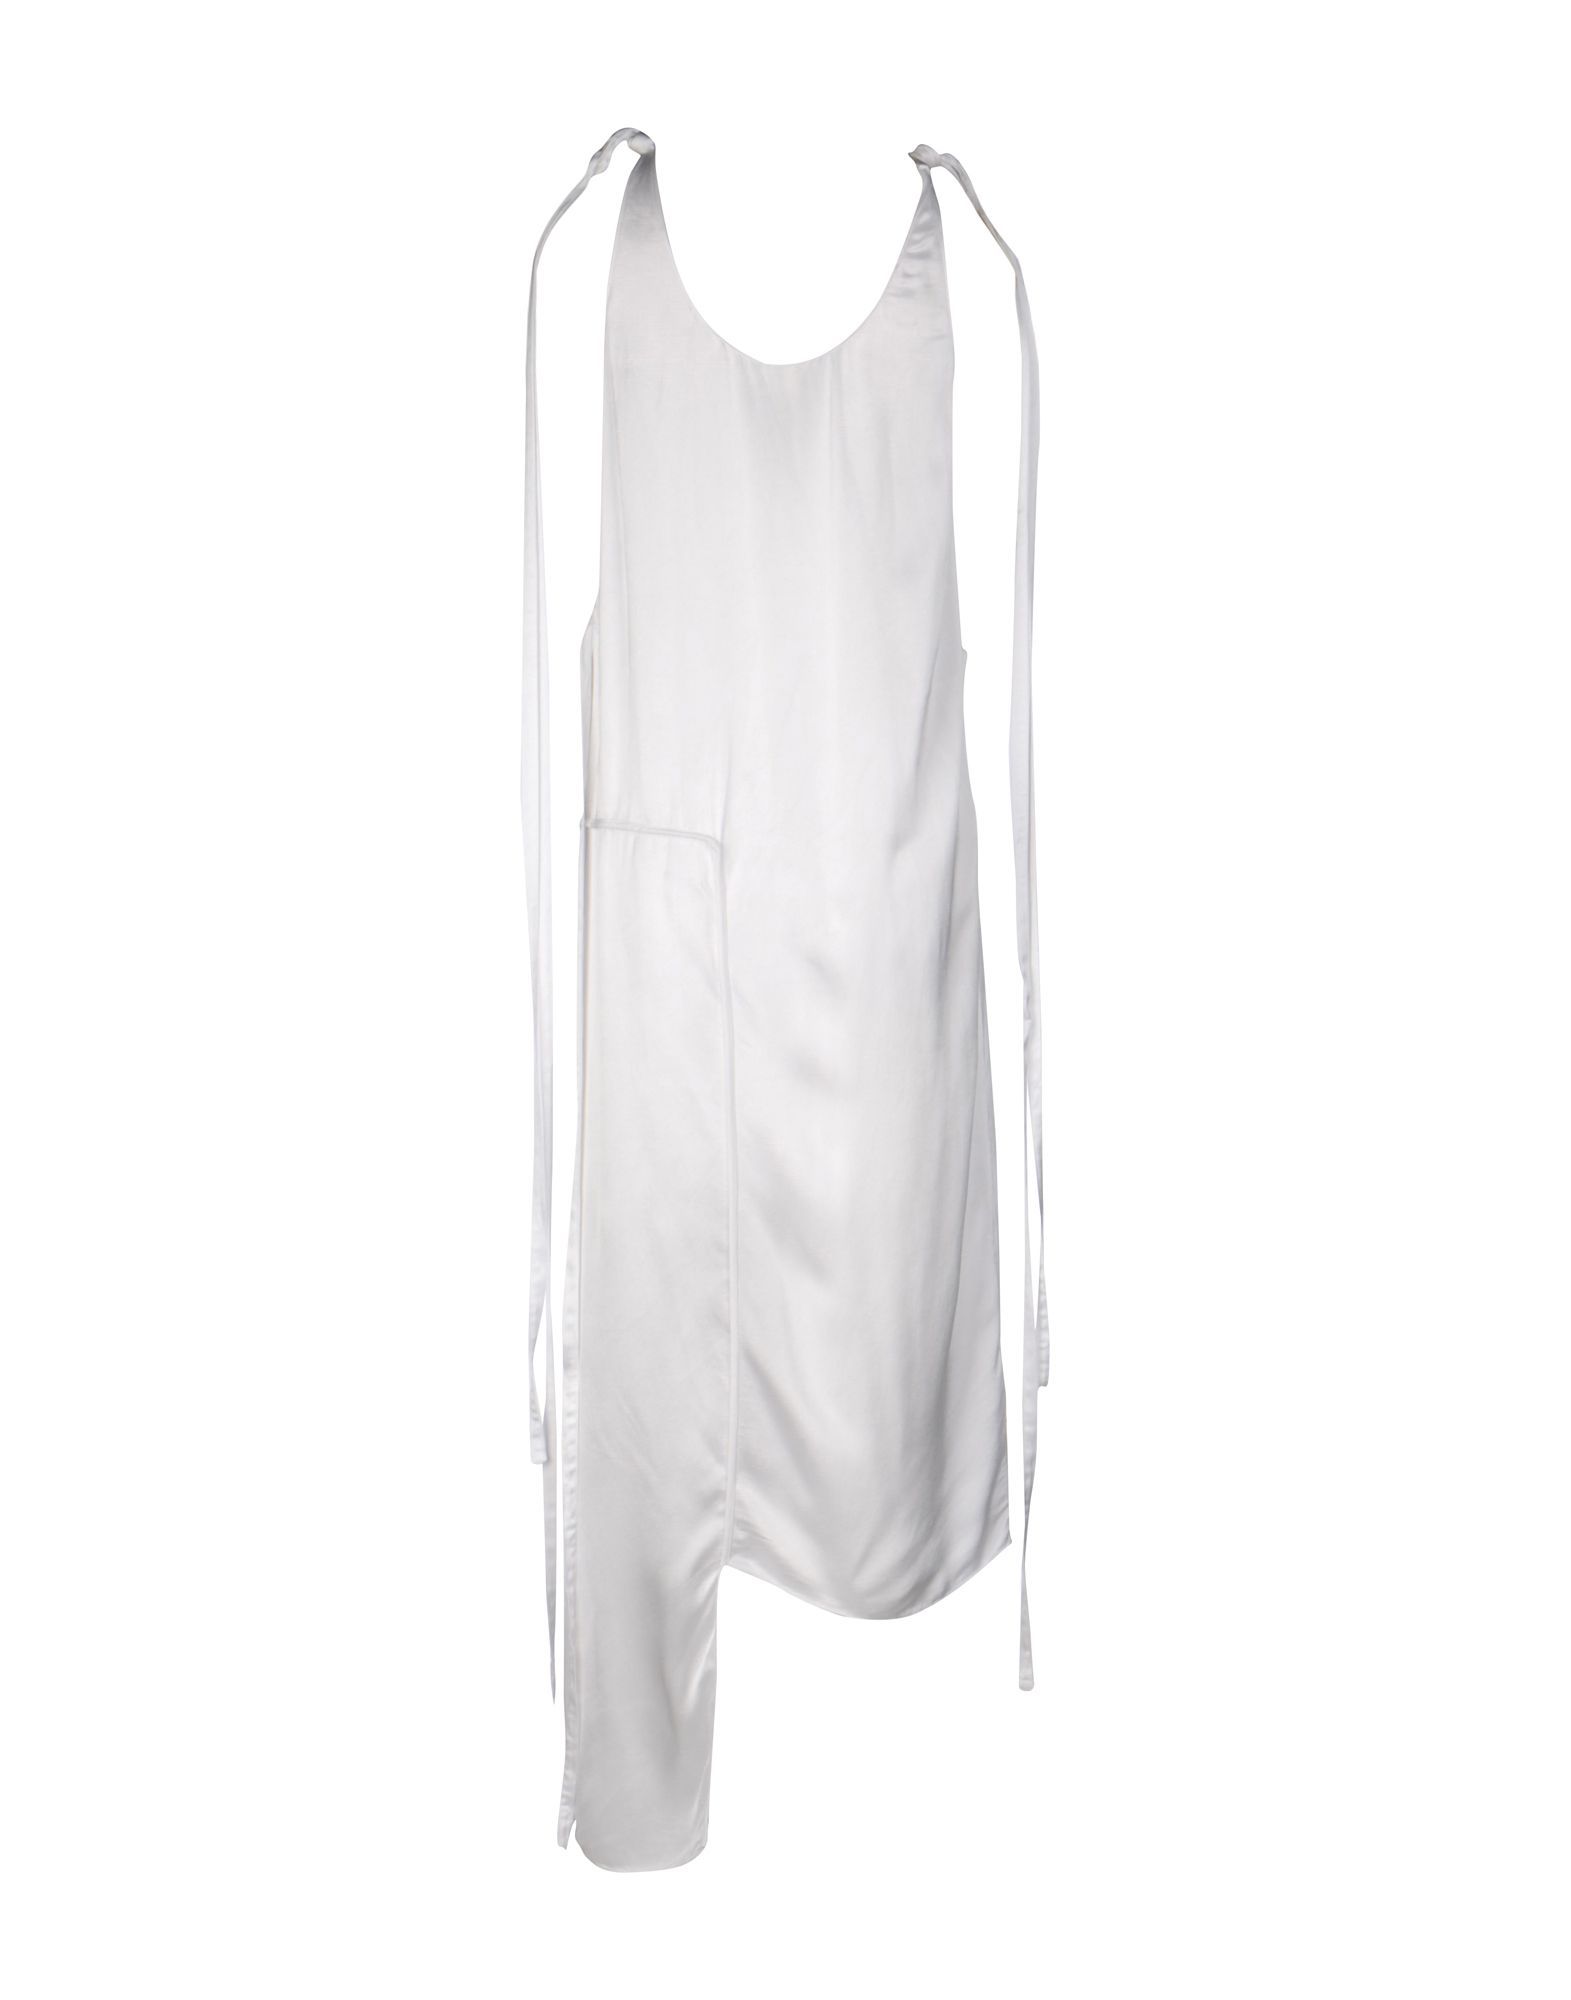 satin, lacing, solid colour, wide neckline, sleeveless, no pockets, unlined, no fastening, dress